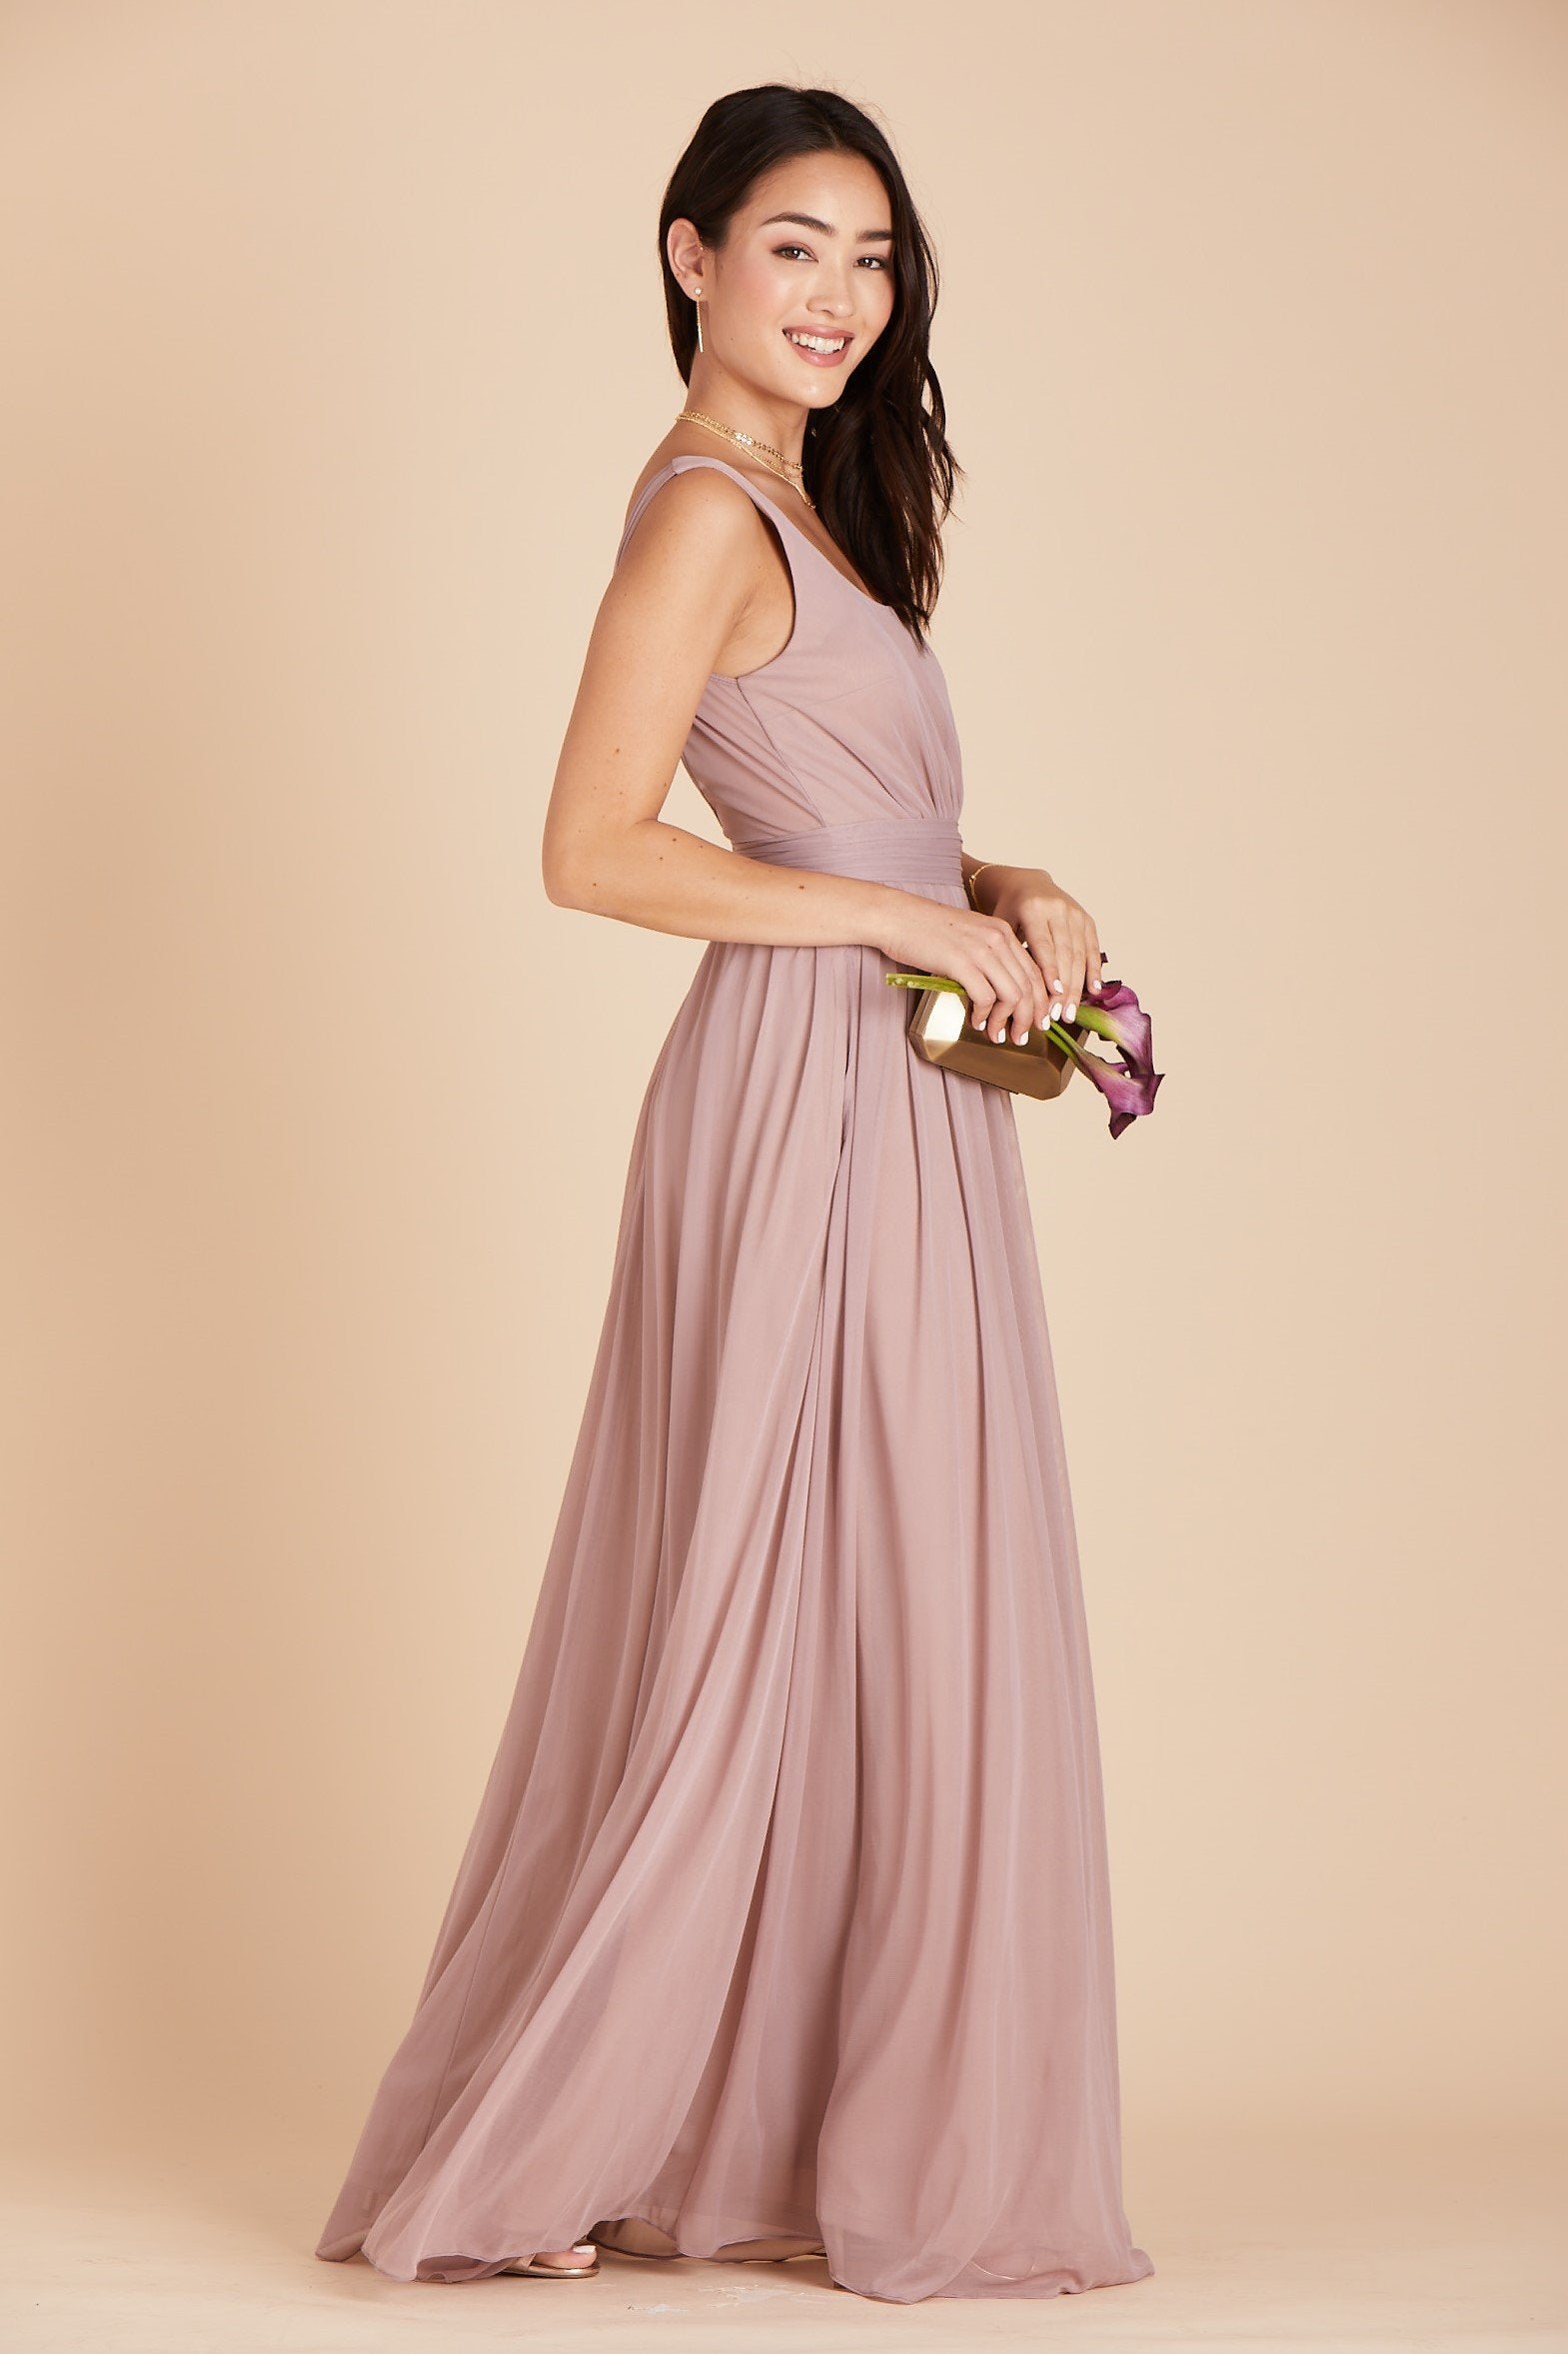 Jay bridesmaids dress in mauve chiffon by Birdy Grey, side view